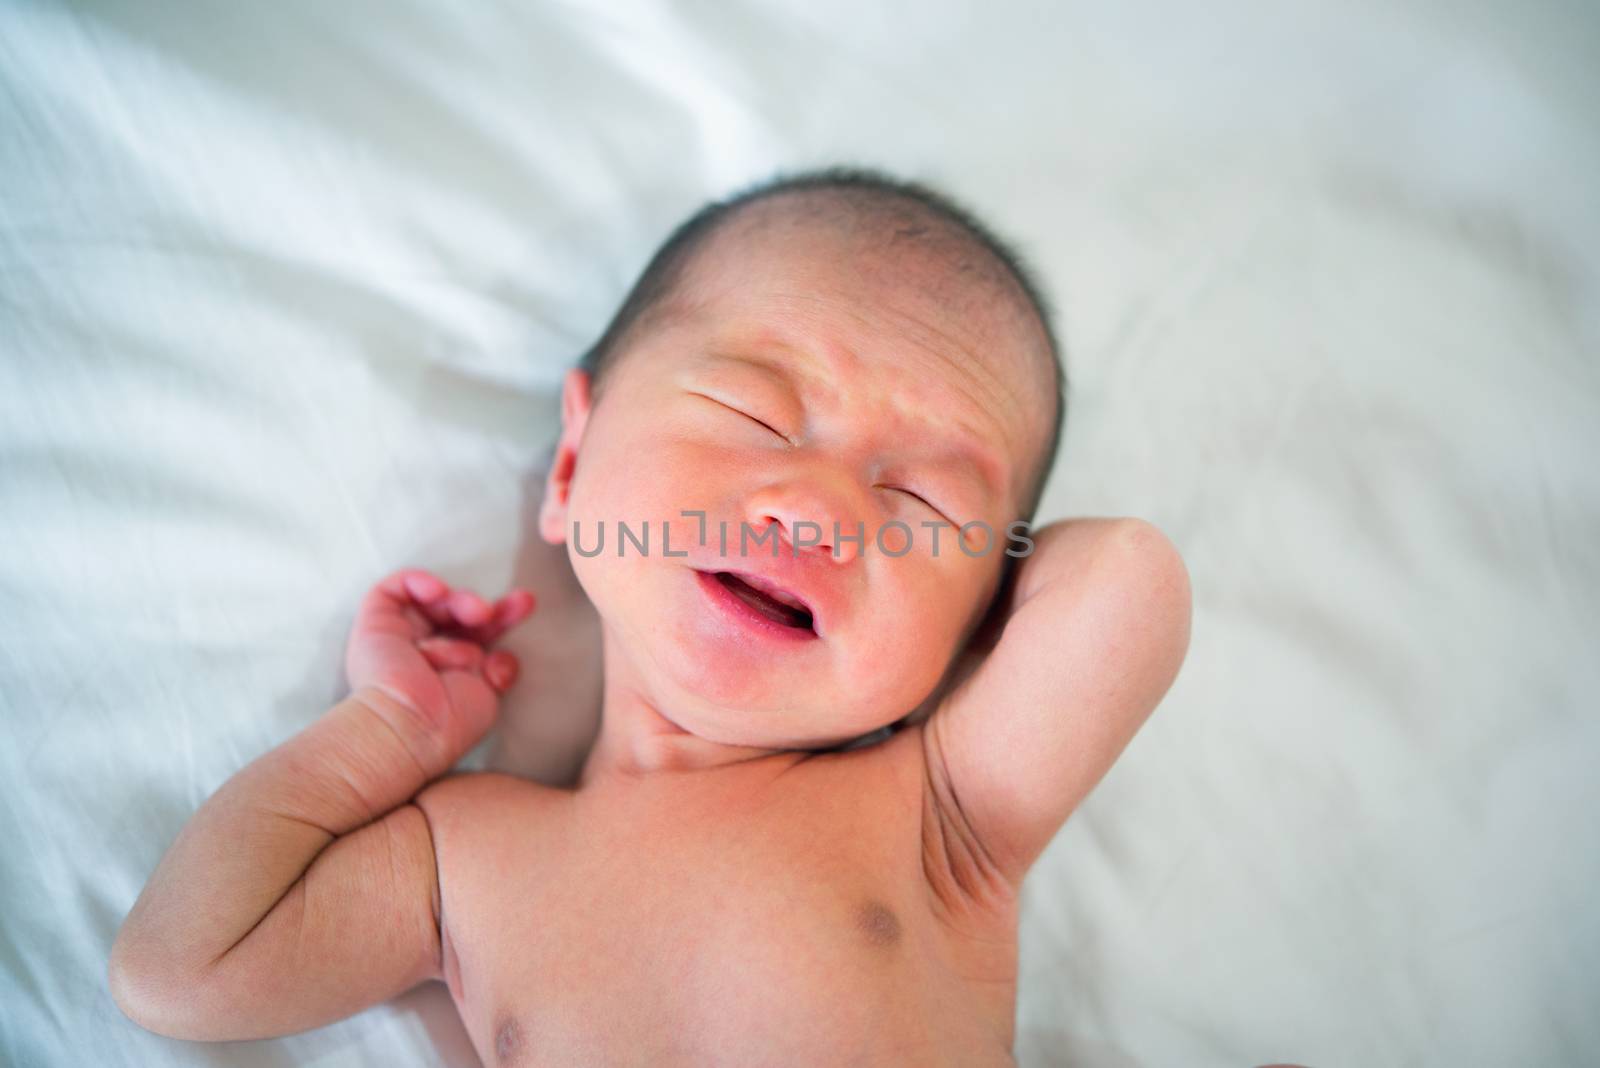 Newborn baby crying on the bed, selective focus